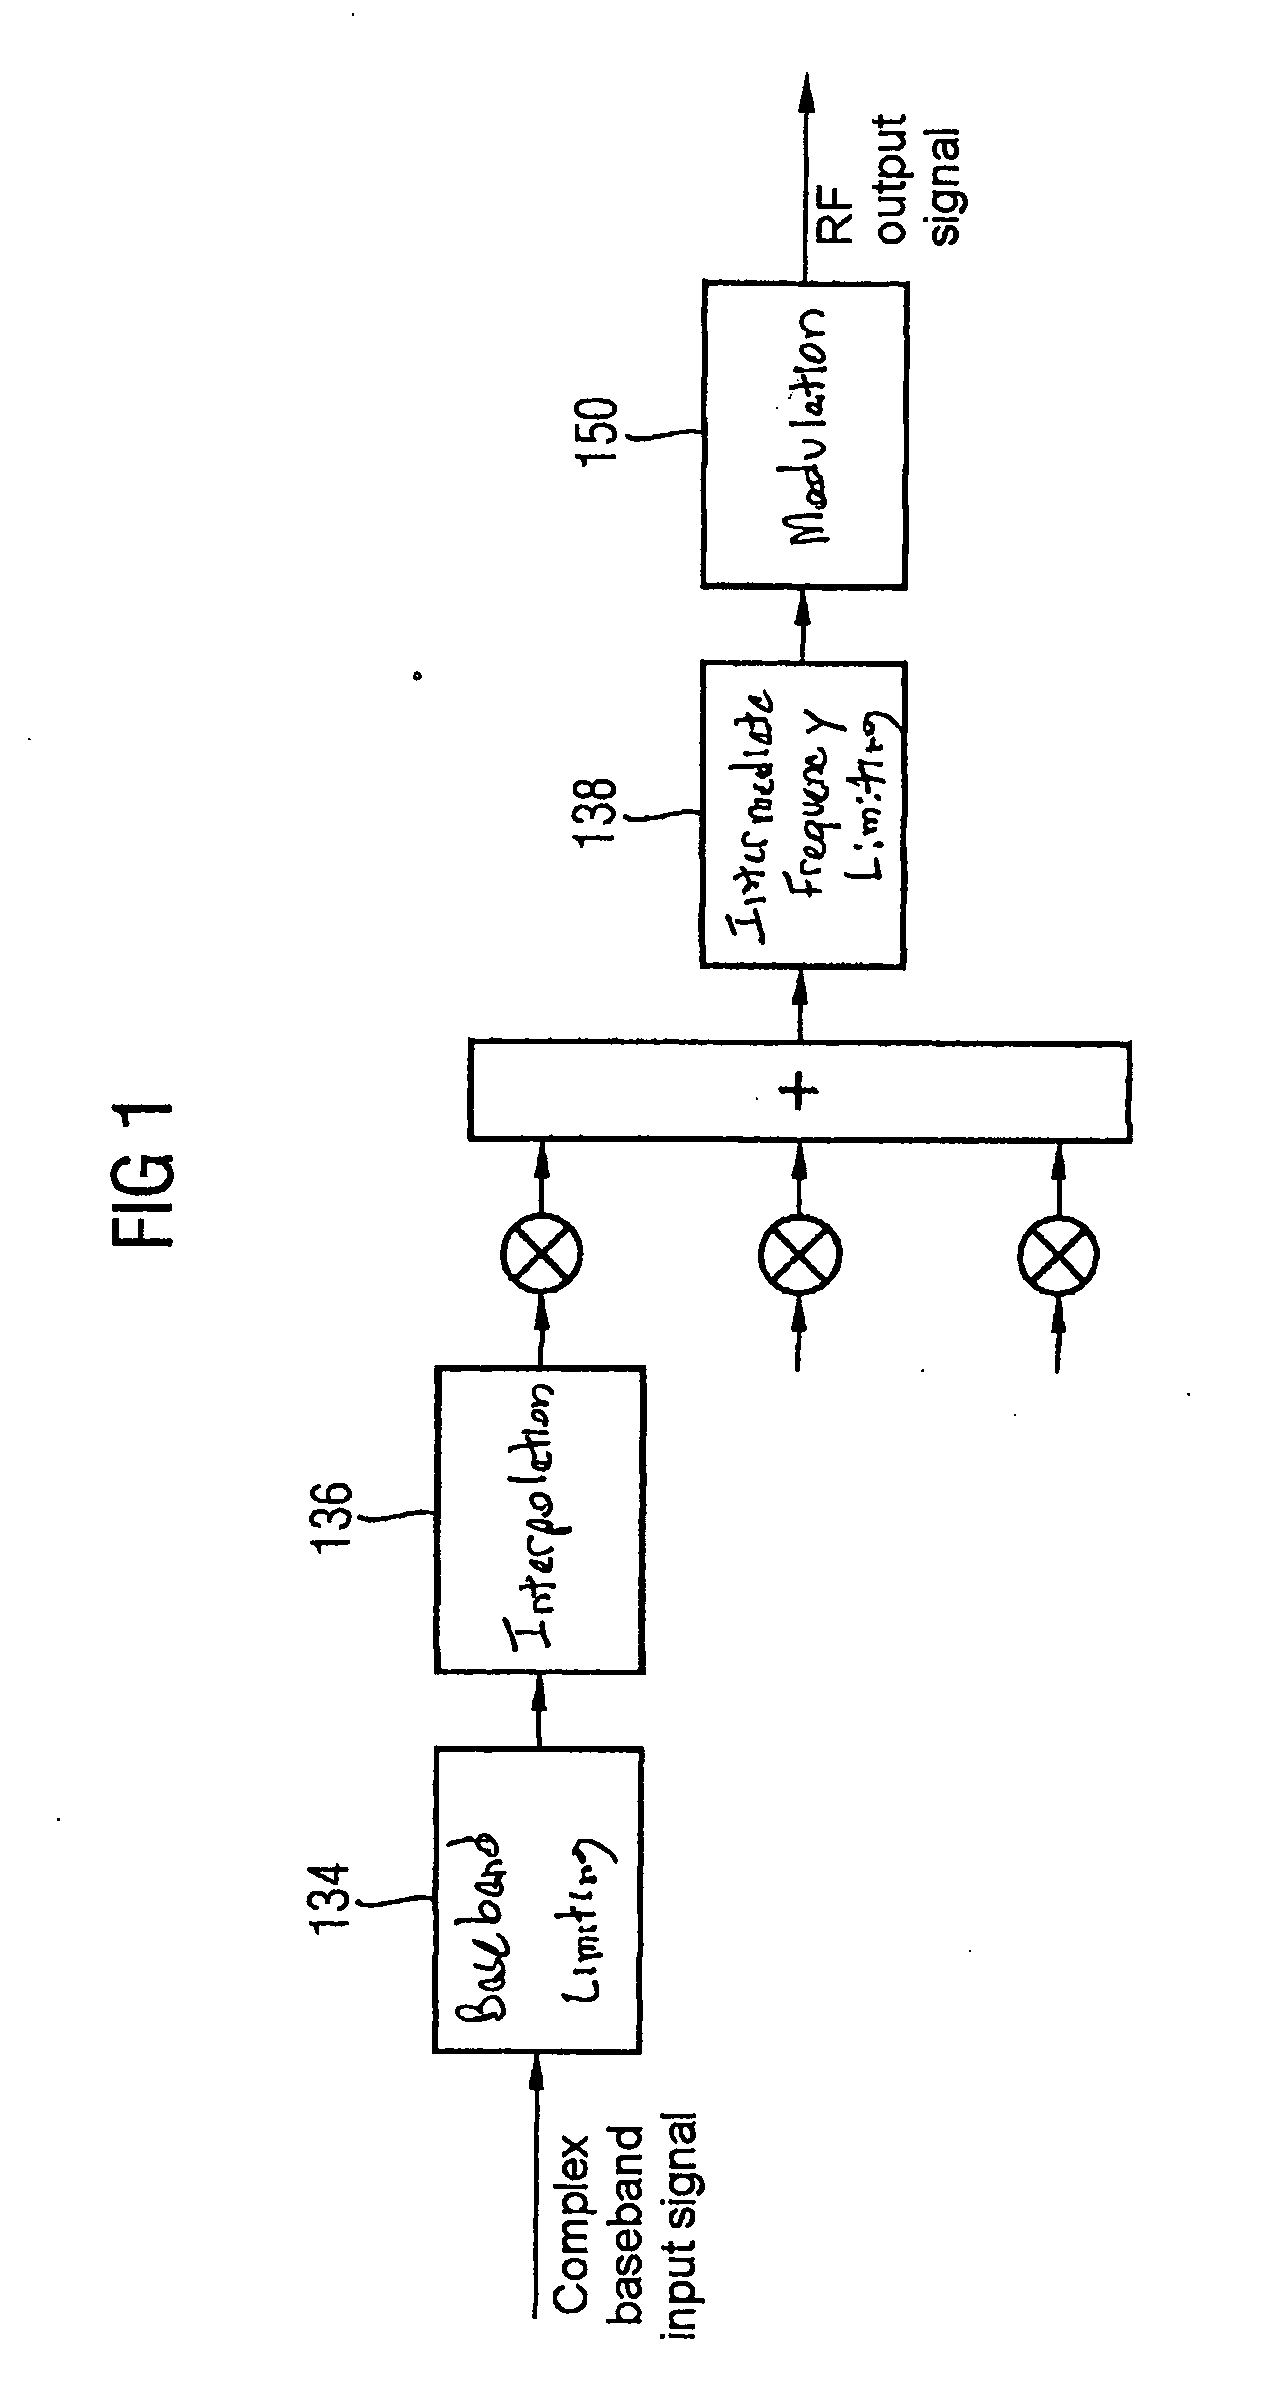 Apparatus and method for producing a signal to reduce the par in a multicarrier system